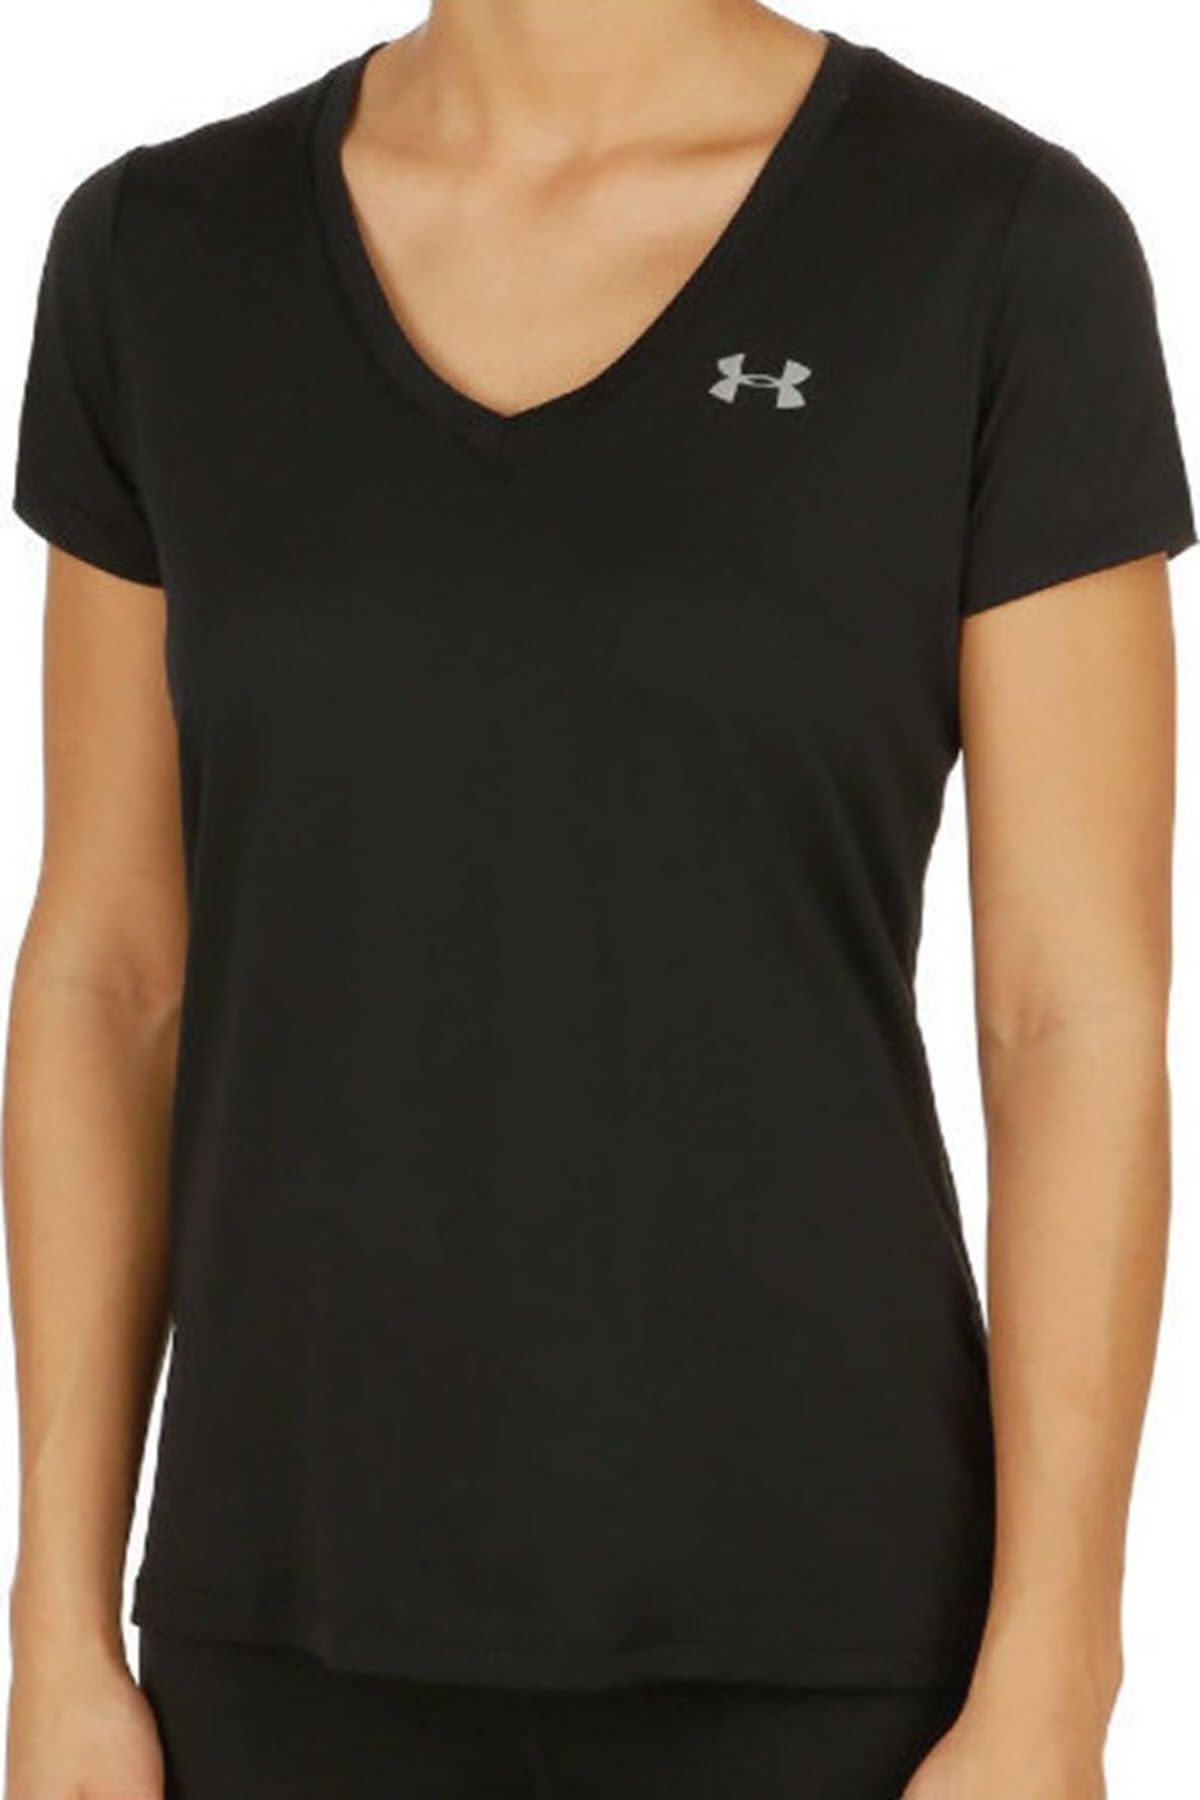 Under Armour Tech SSV - Solid - 1255839-002